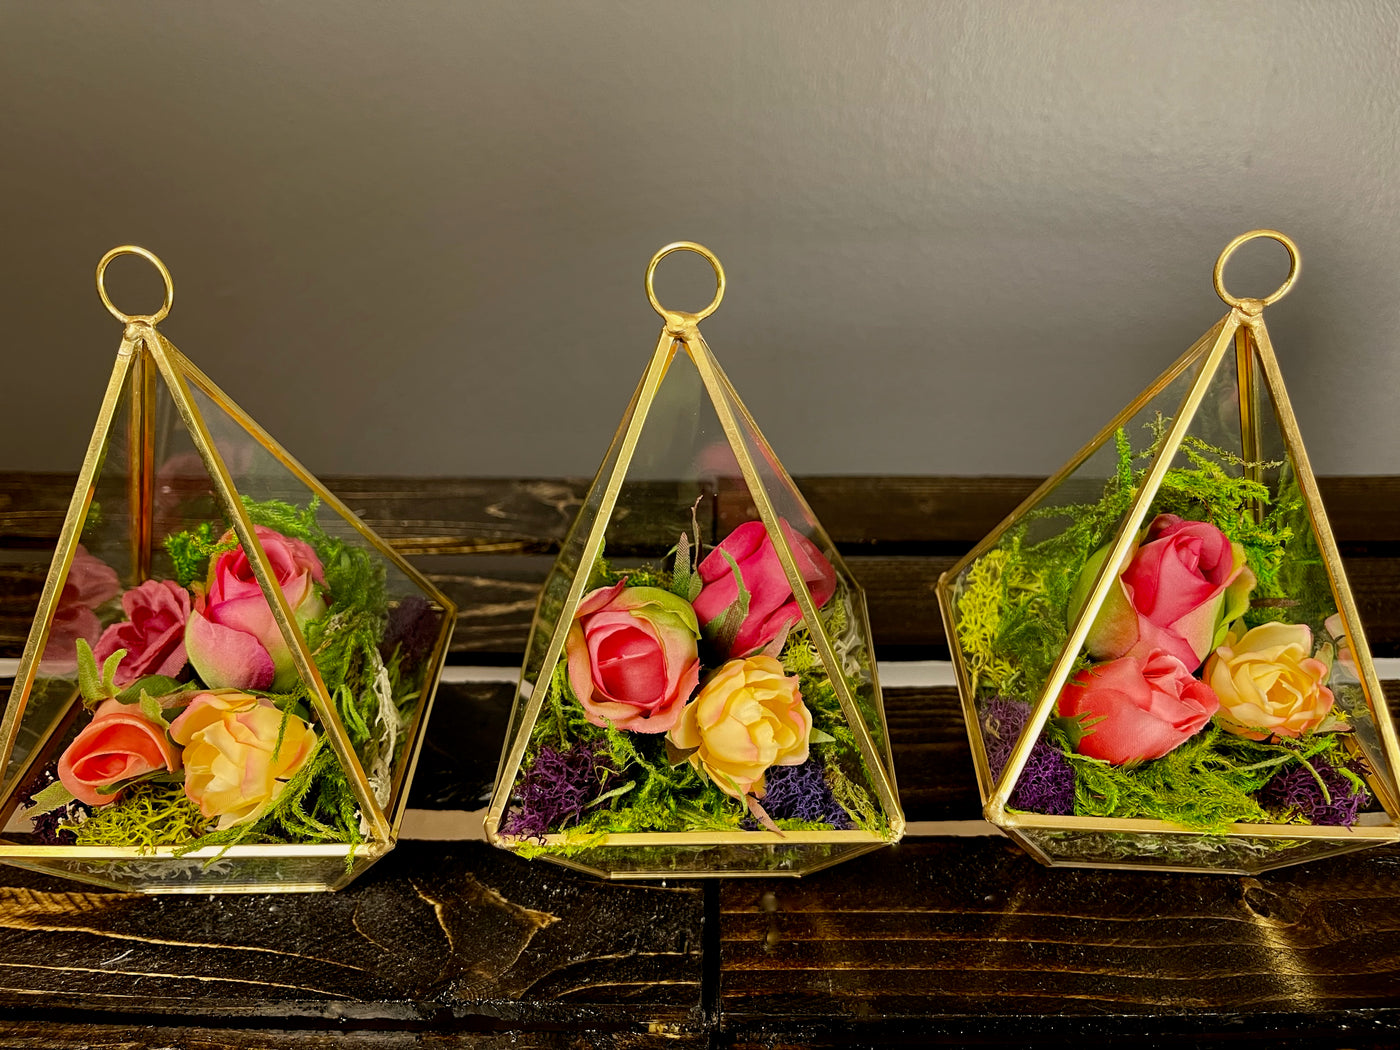 The golden pyramid trio will add dimension to your event with the formal lines of the gold geometrical pyramid, juxtaposed with the soft natural shapes of the moss and floral terrarium.   Small Pyramid L5.5", W3"